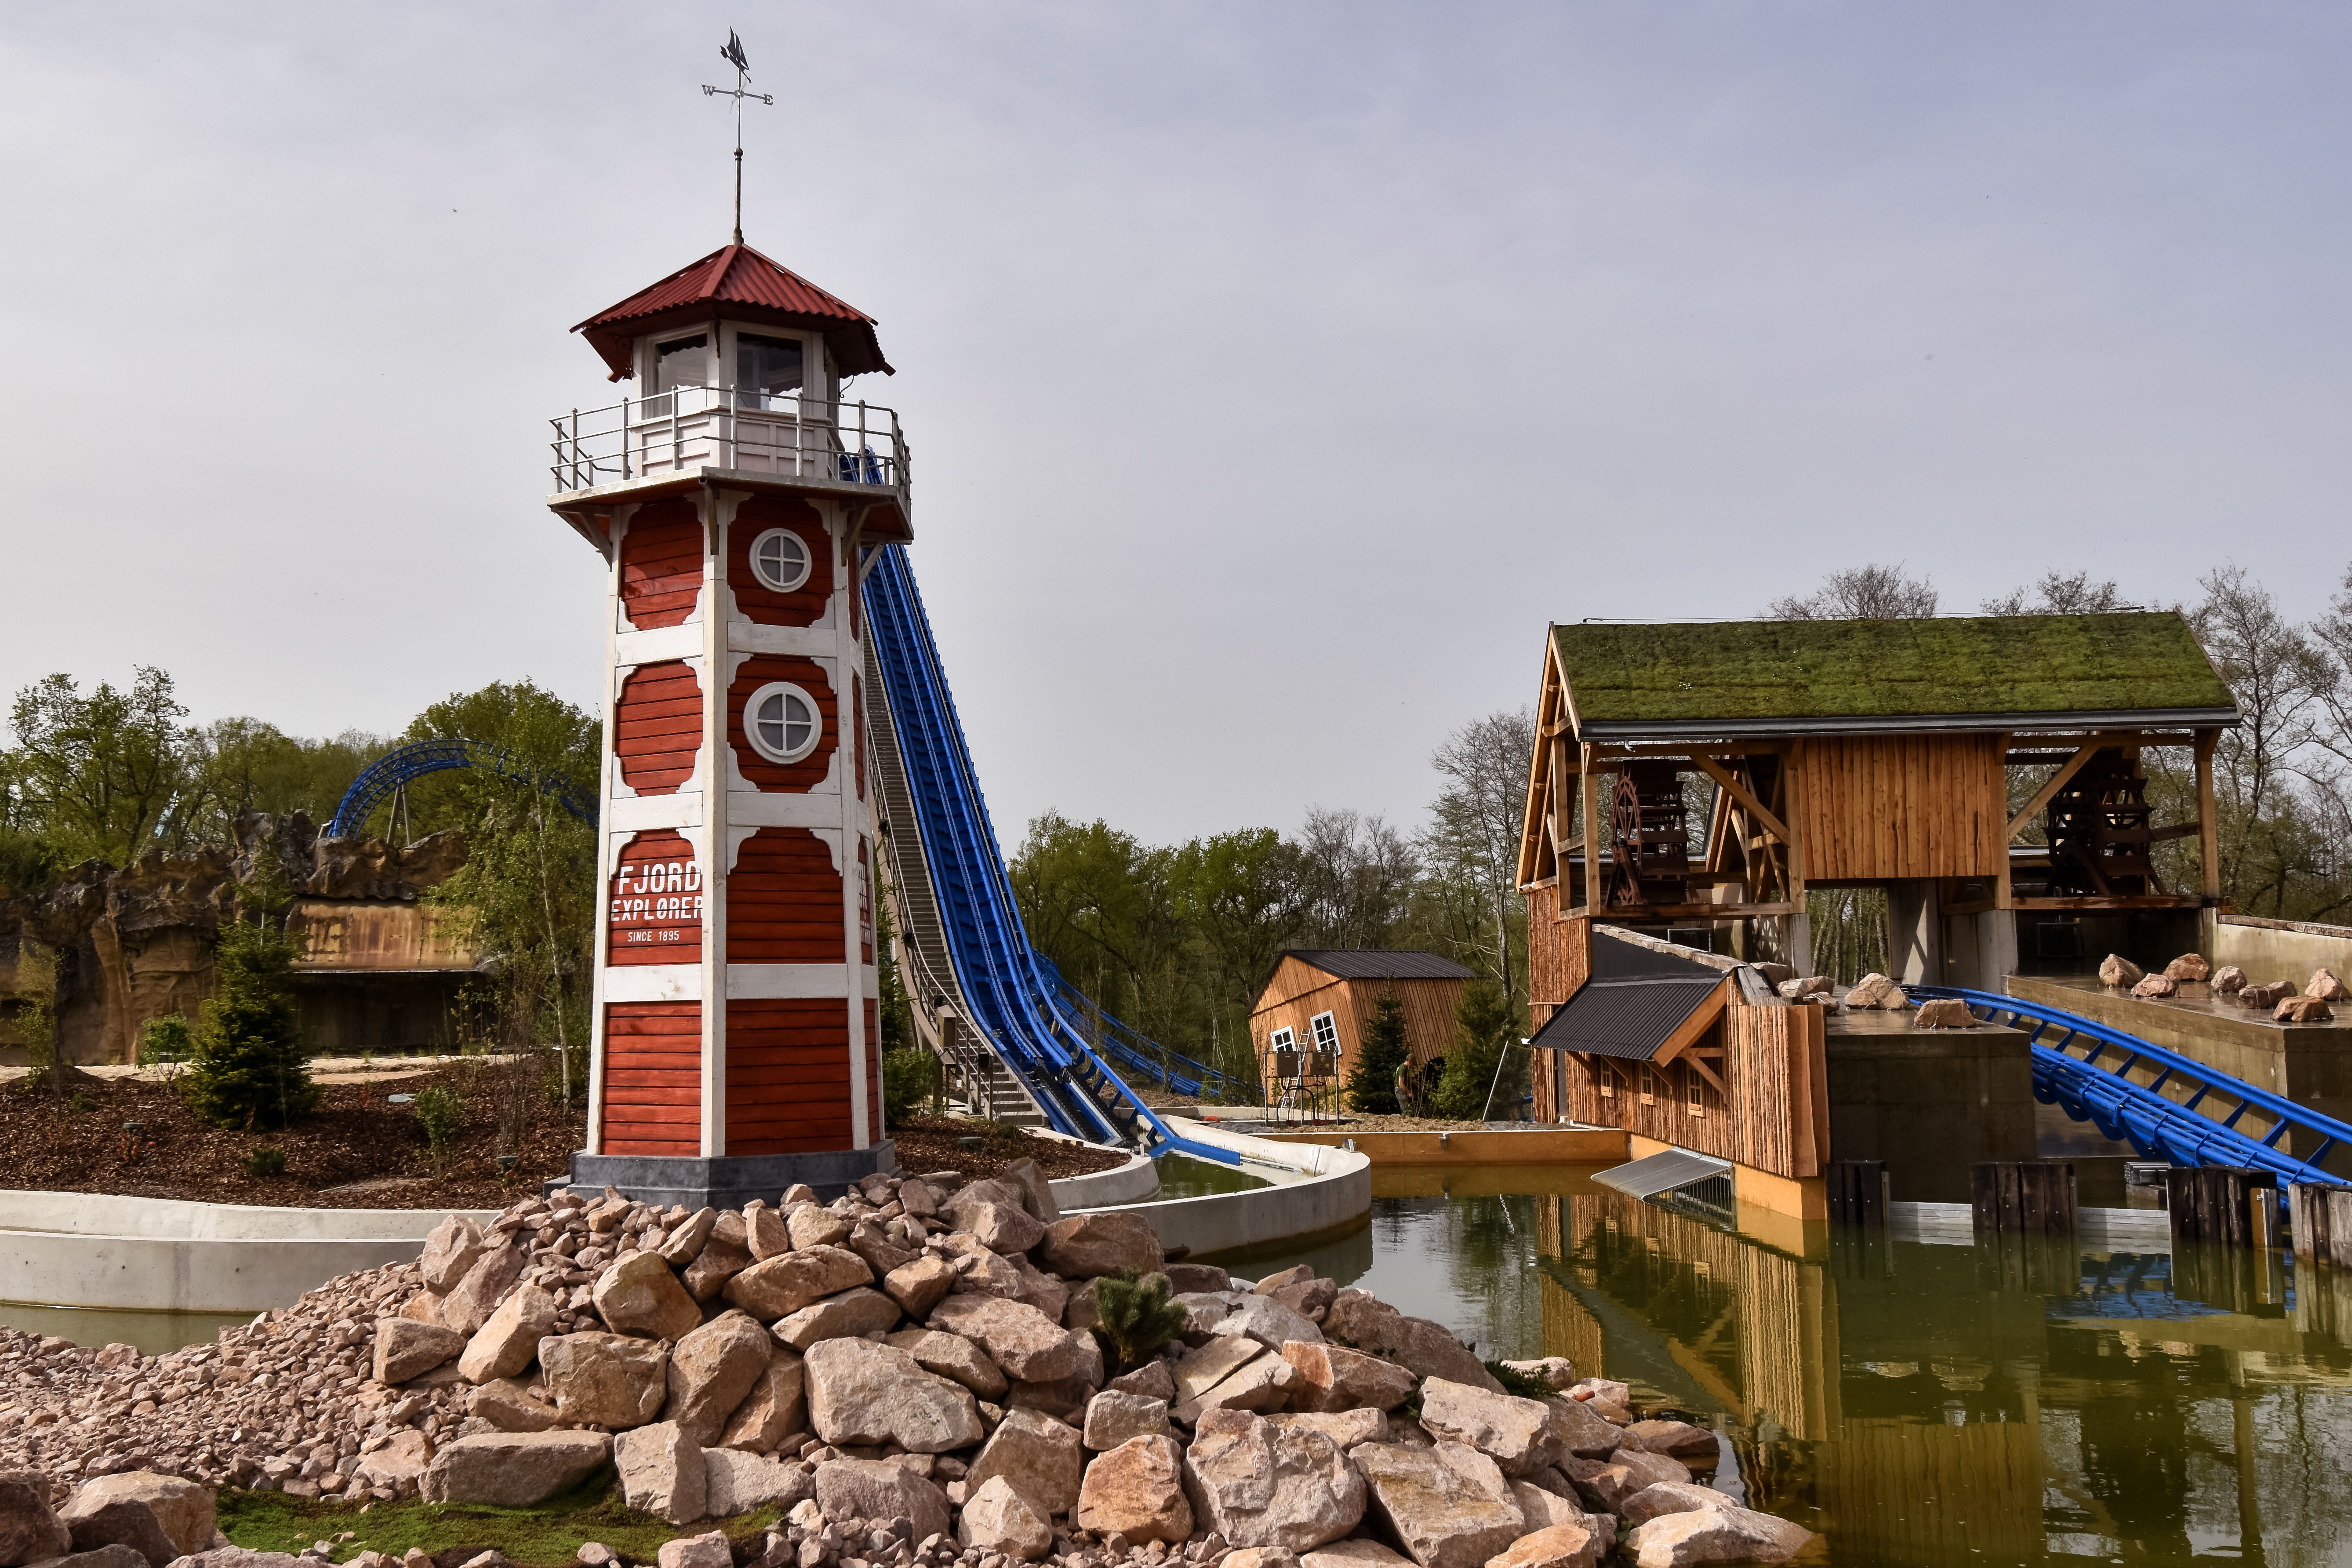 Fjord Explorer attraction in Le PAL